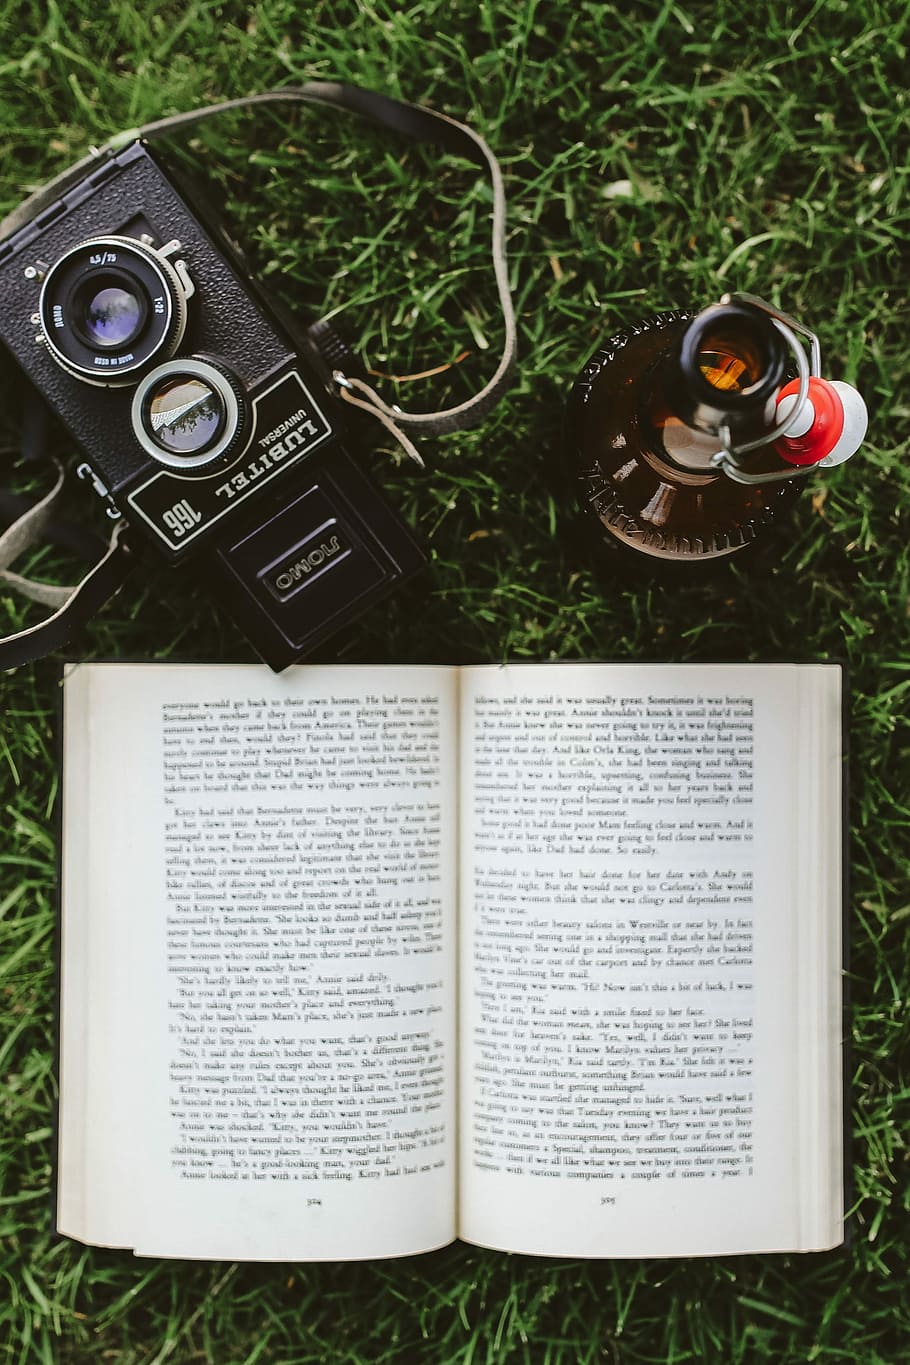 grass, Book, reading, leaf, literature, camera - Photographic Equipment, old-fashioned, old, music, high angle view